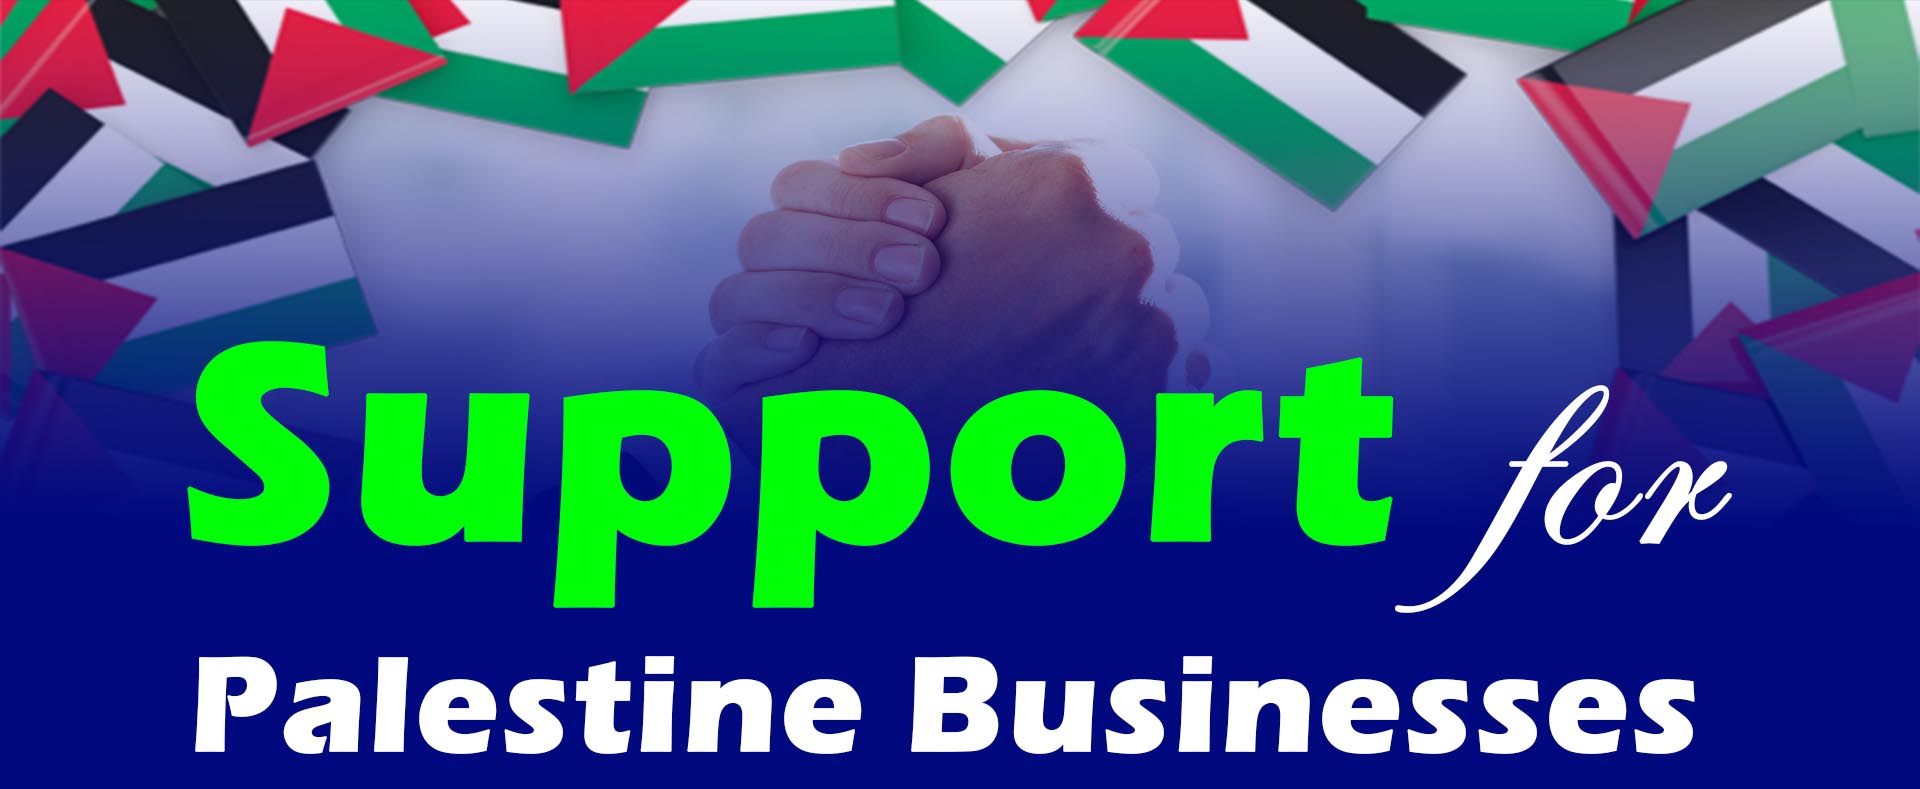 Support for Palestine businesses